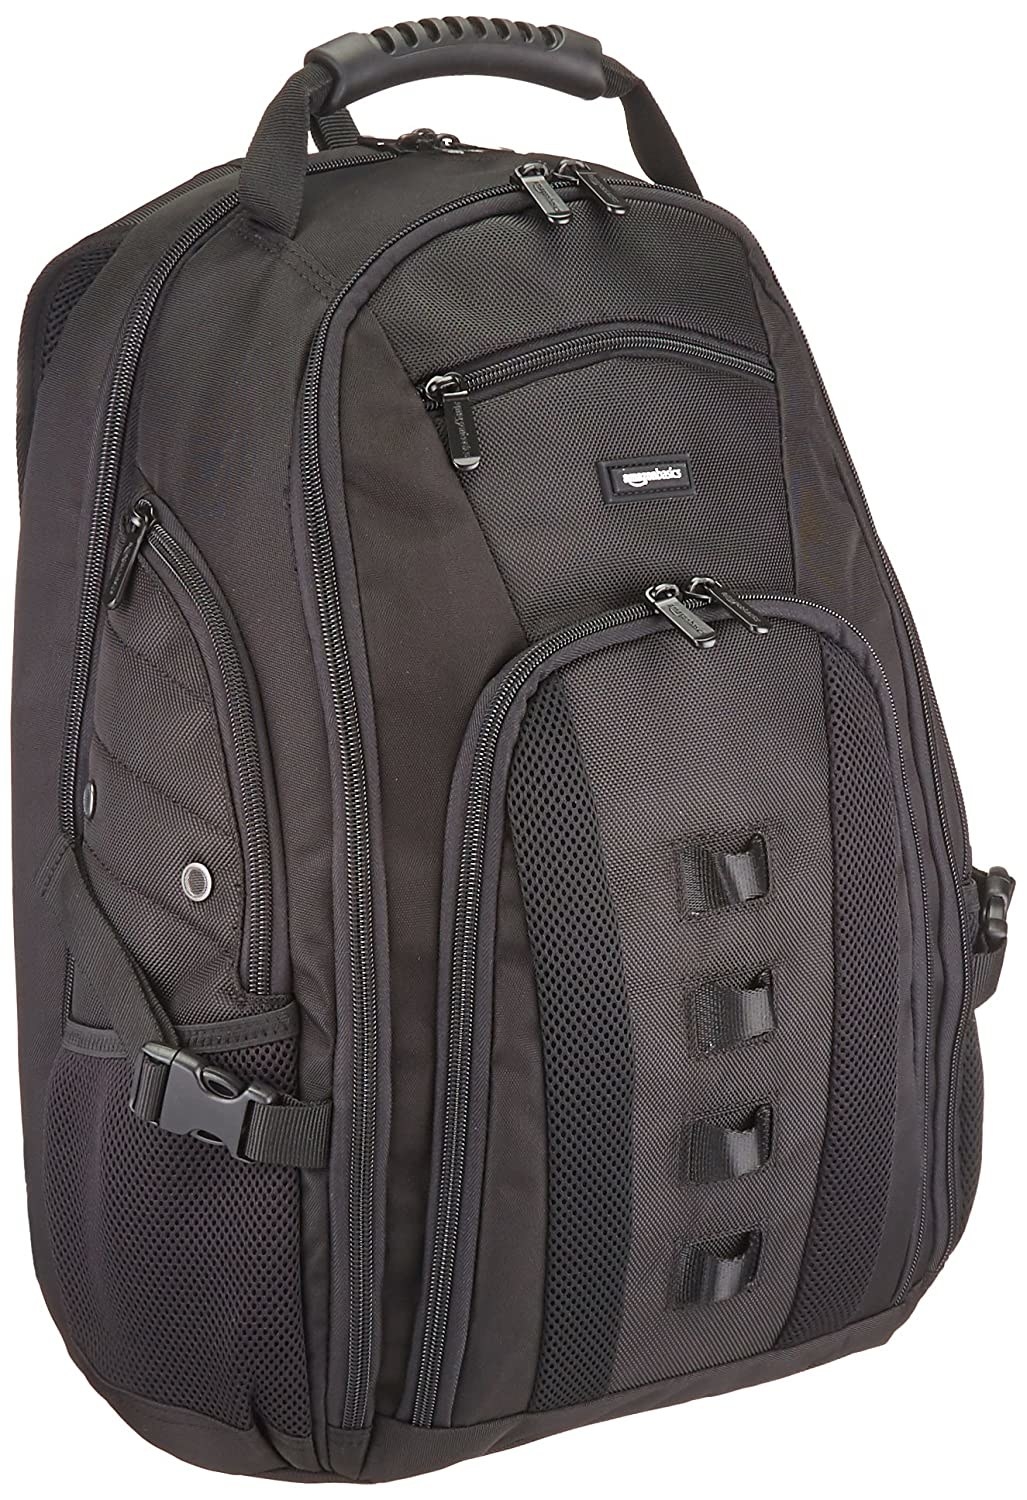 A closed laptop bag in black